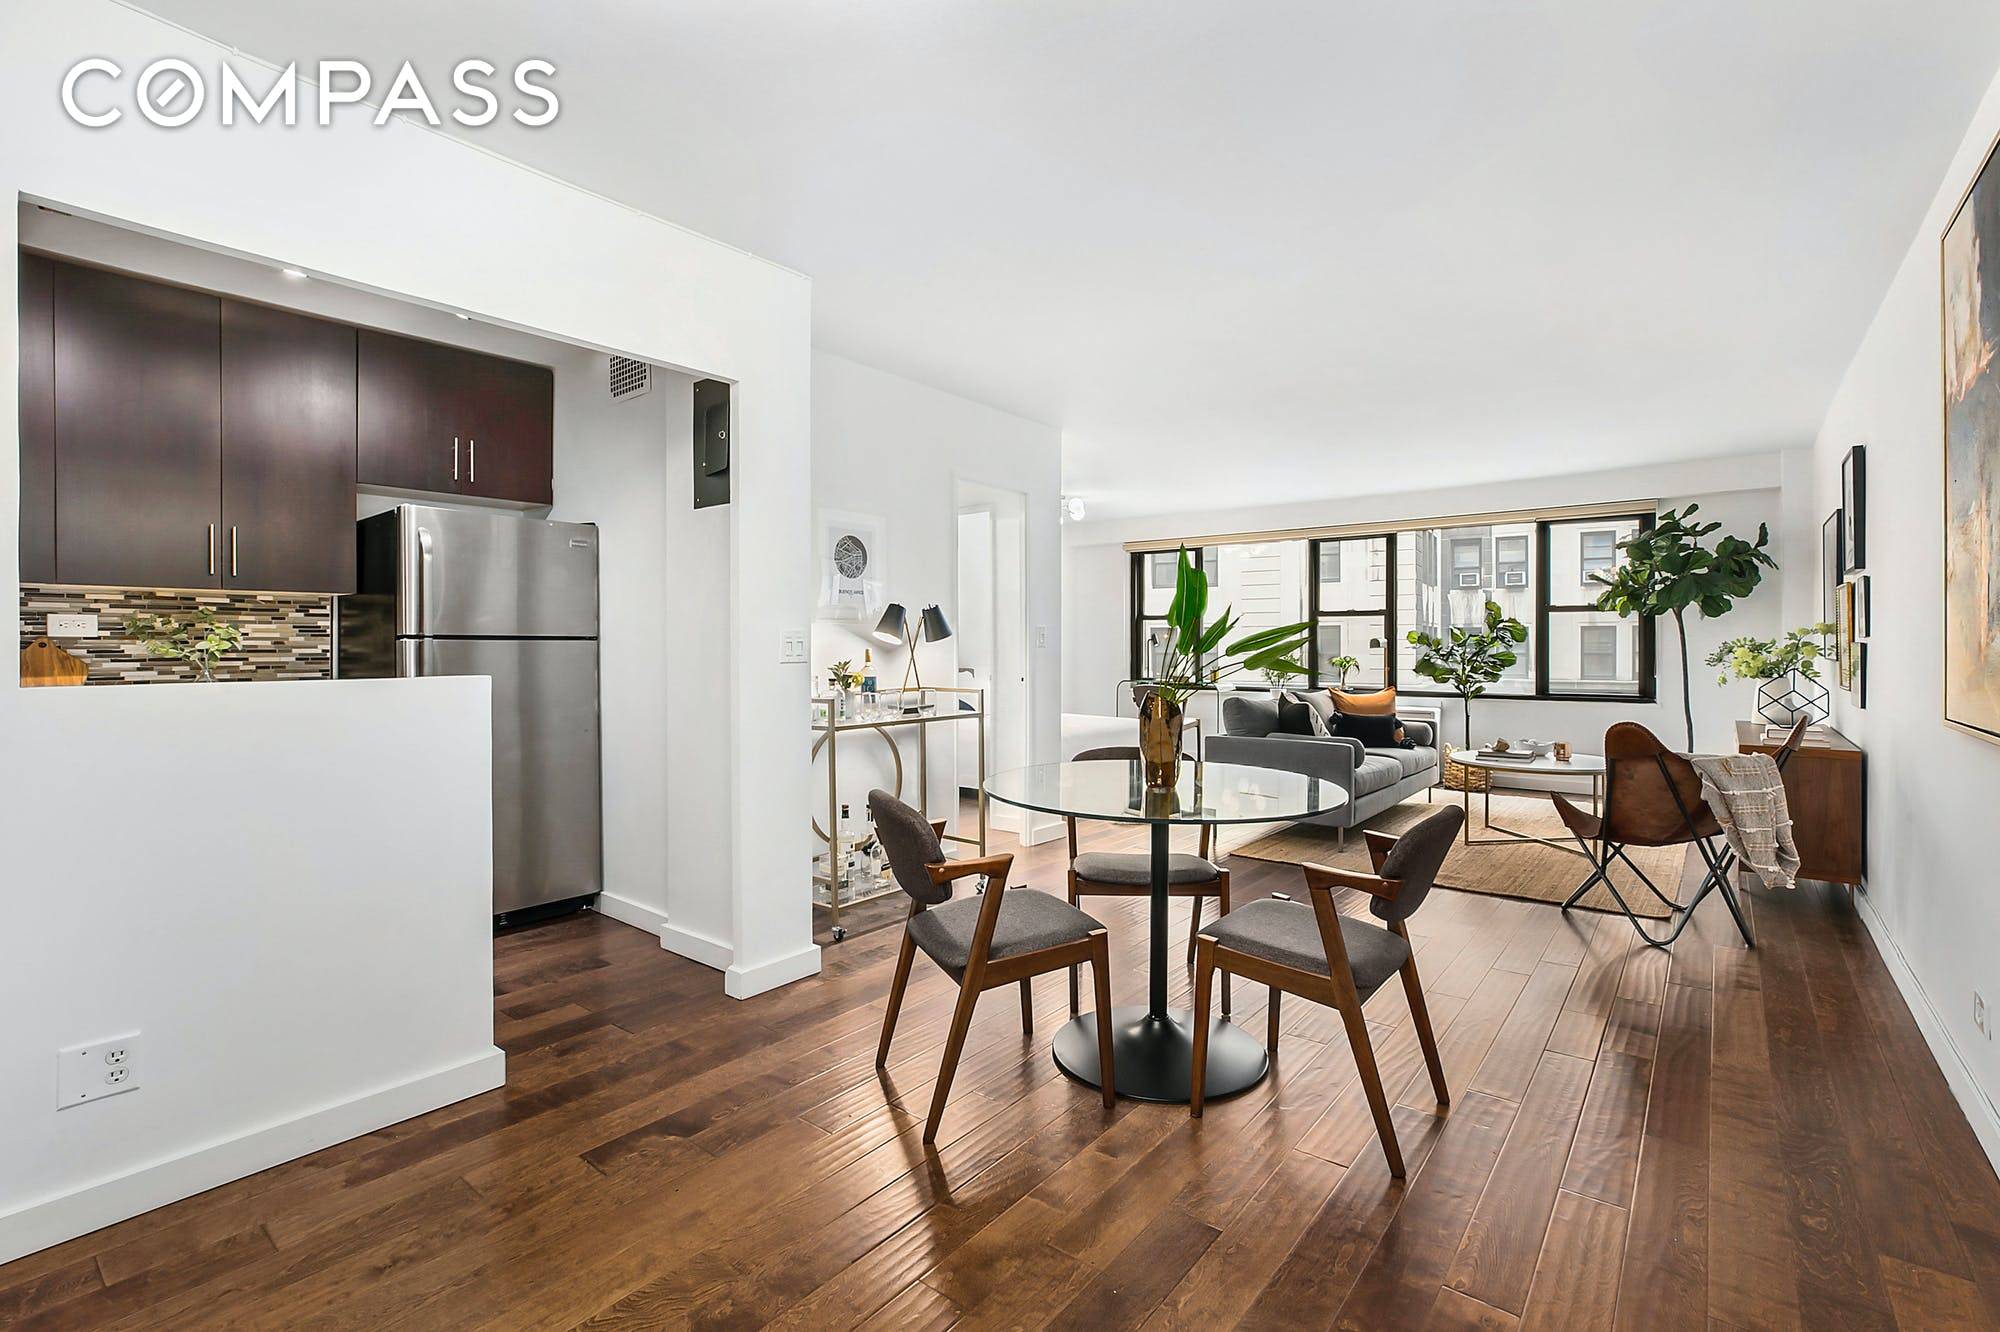 A renovated, enormous and bright alcove studio easily convertible into a junior one bedroom home in a full service doorman building on the border of Brooklyn Heights and Downtown Brooklyn.